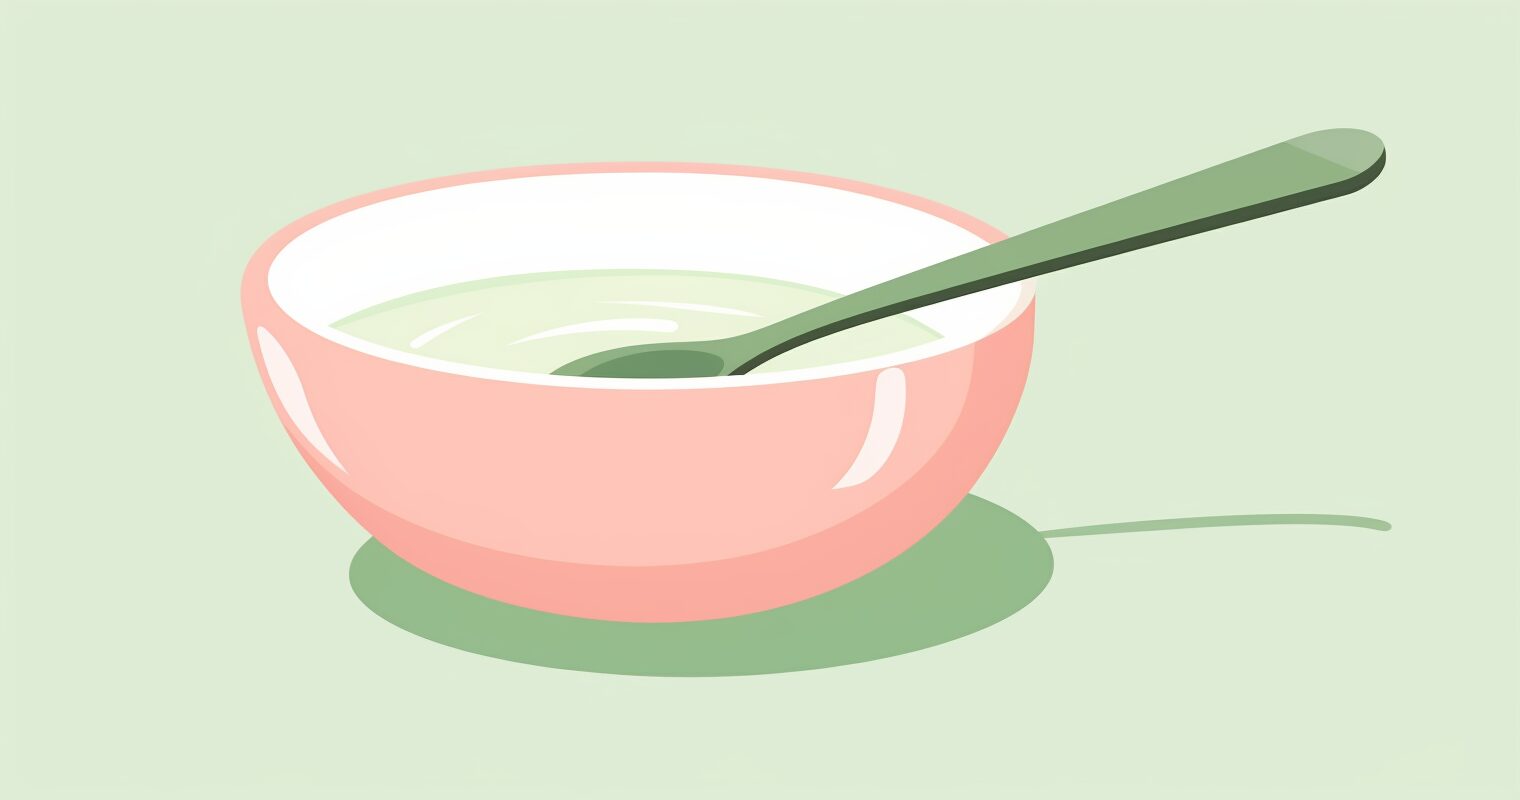 A bowl of soup with a spoon.